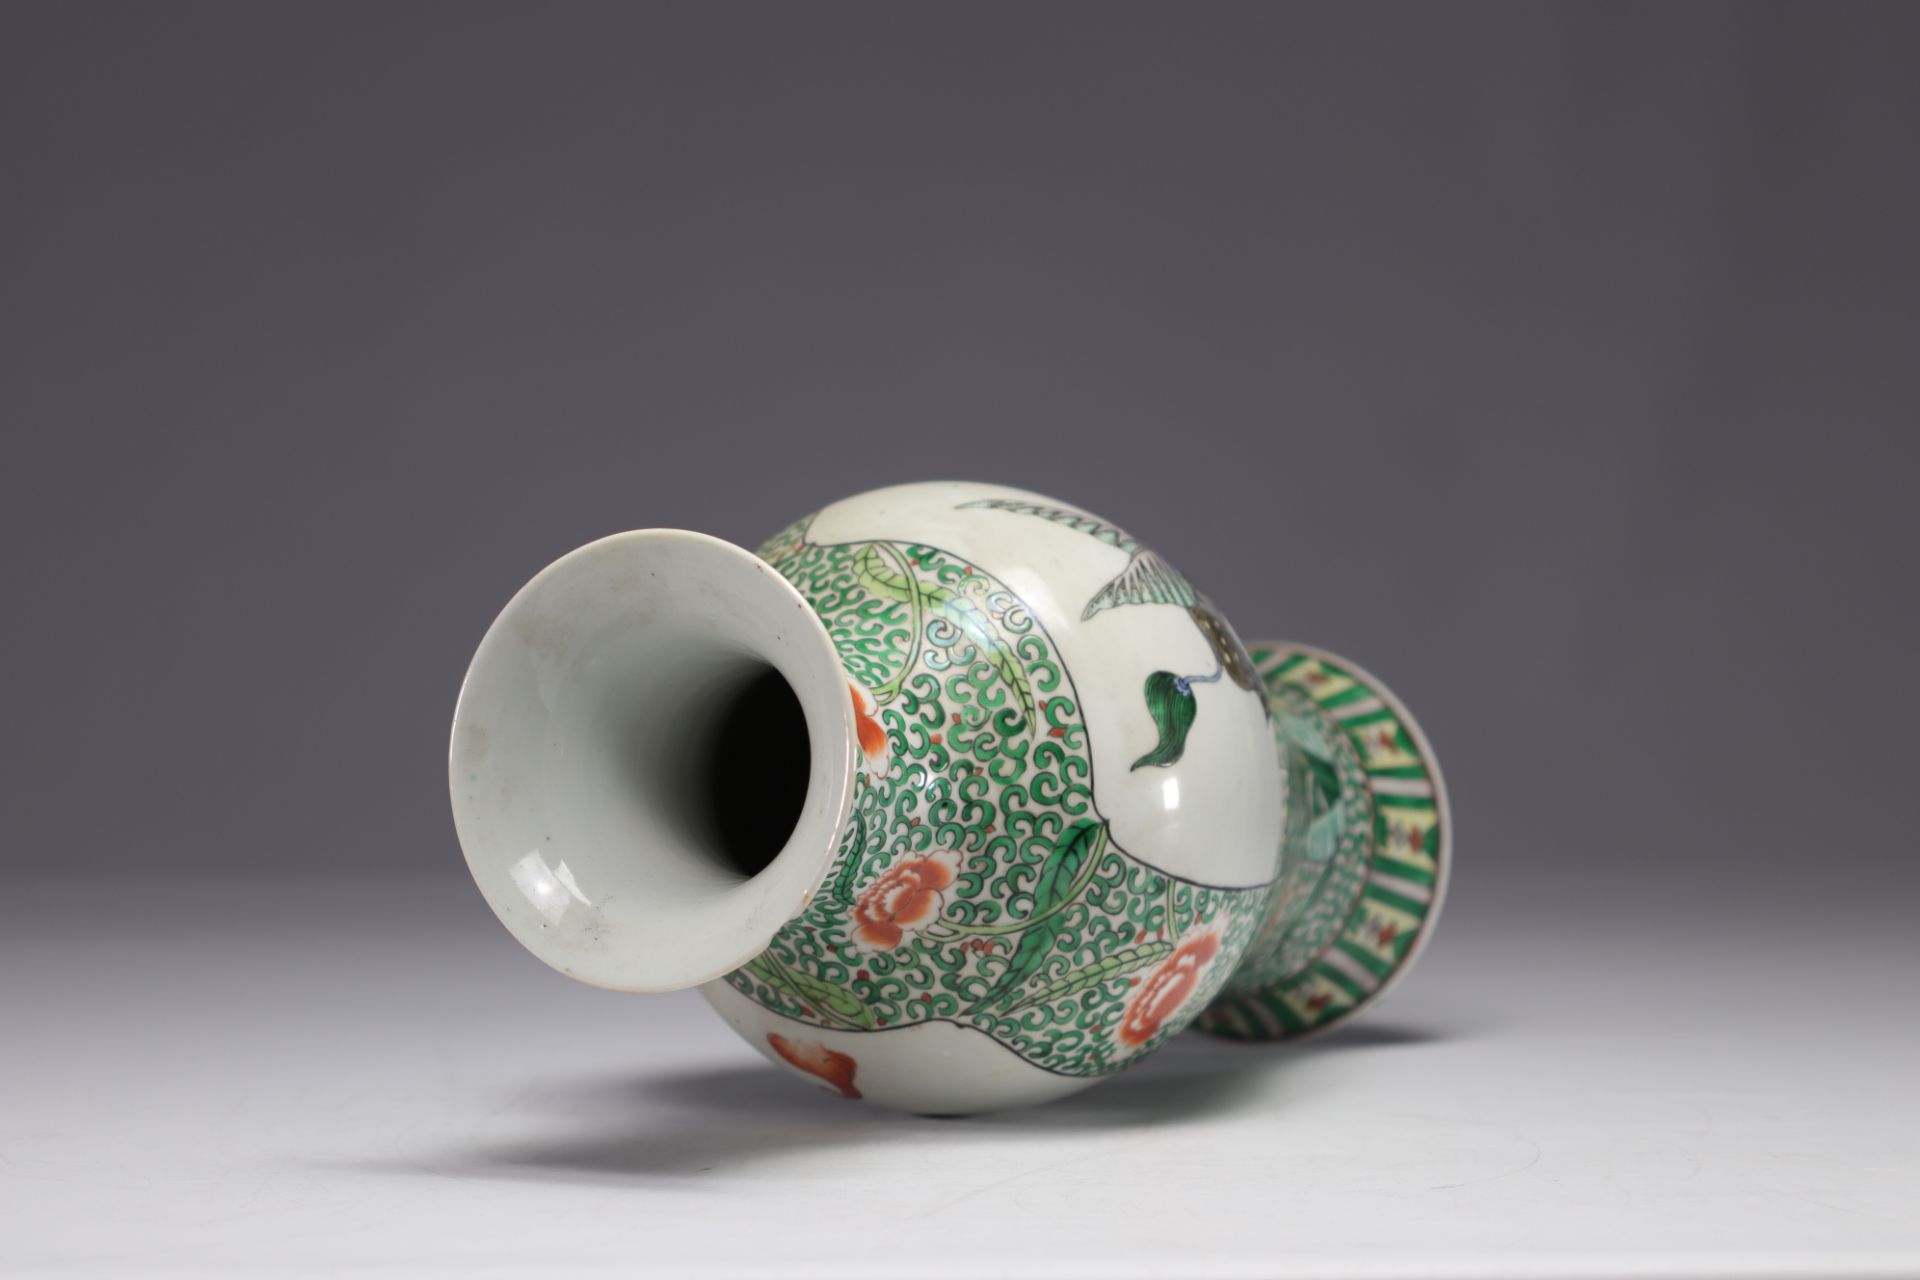 China - A green family porcelain baluster vase, decorated with birds in a cartouche, 19th century. - Image 6 of 6